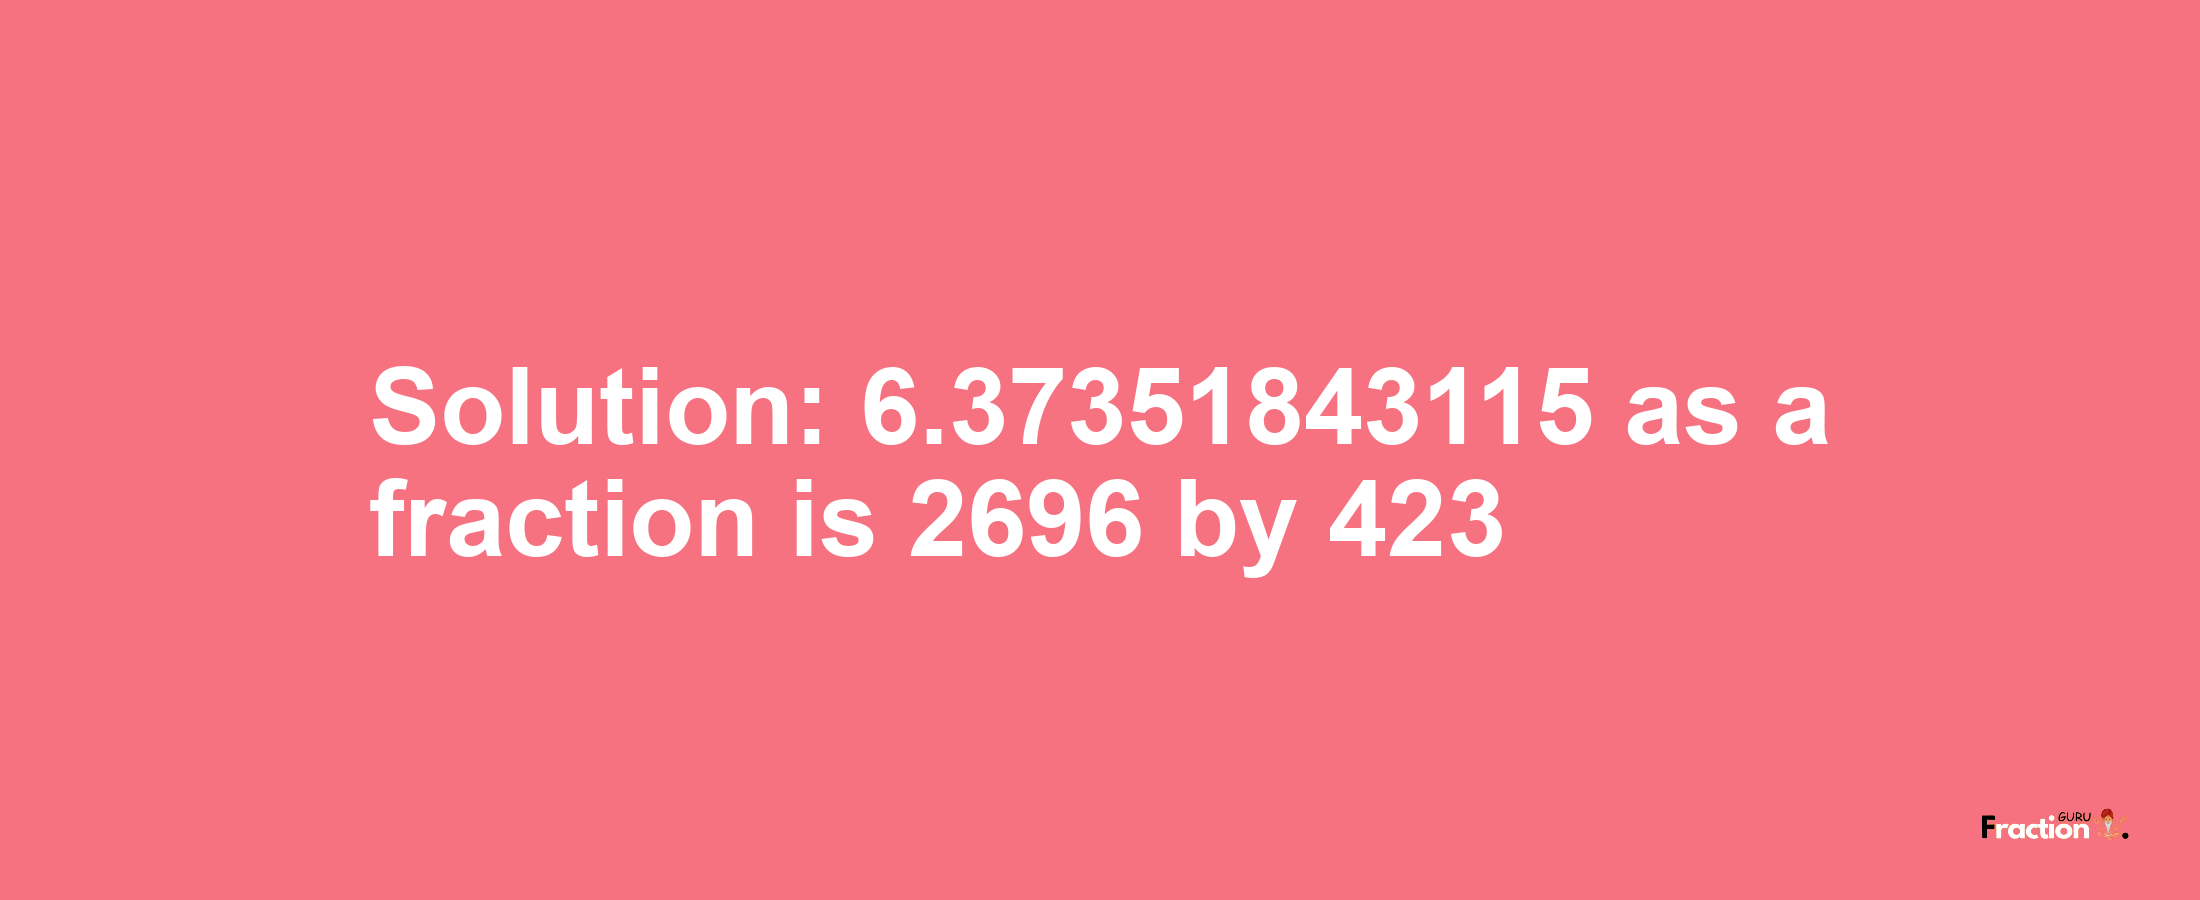 Solution:6.37351843115 as a fraction is 2696/423